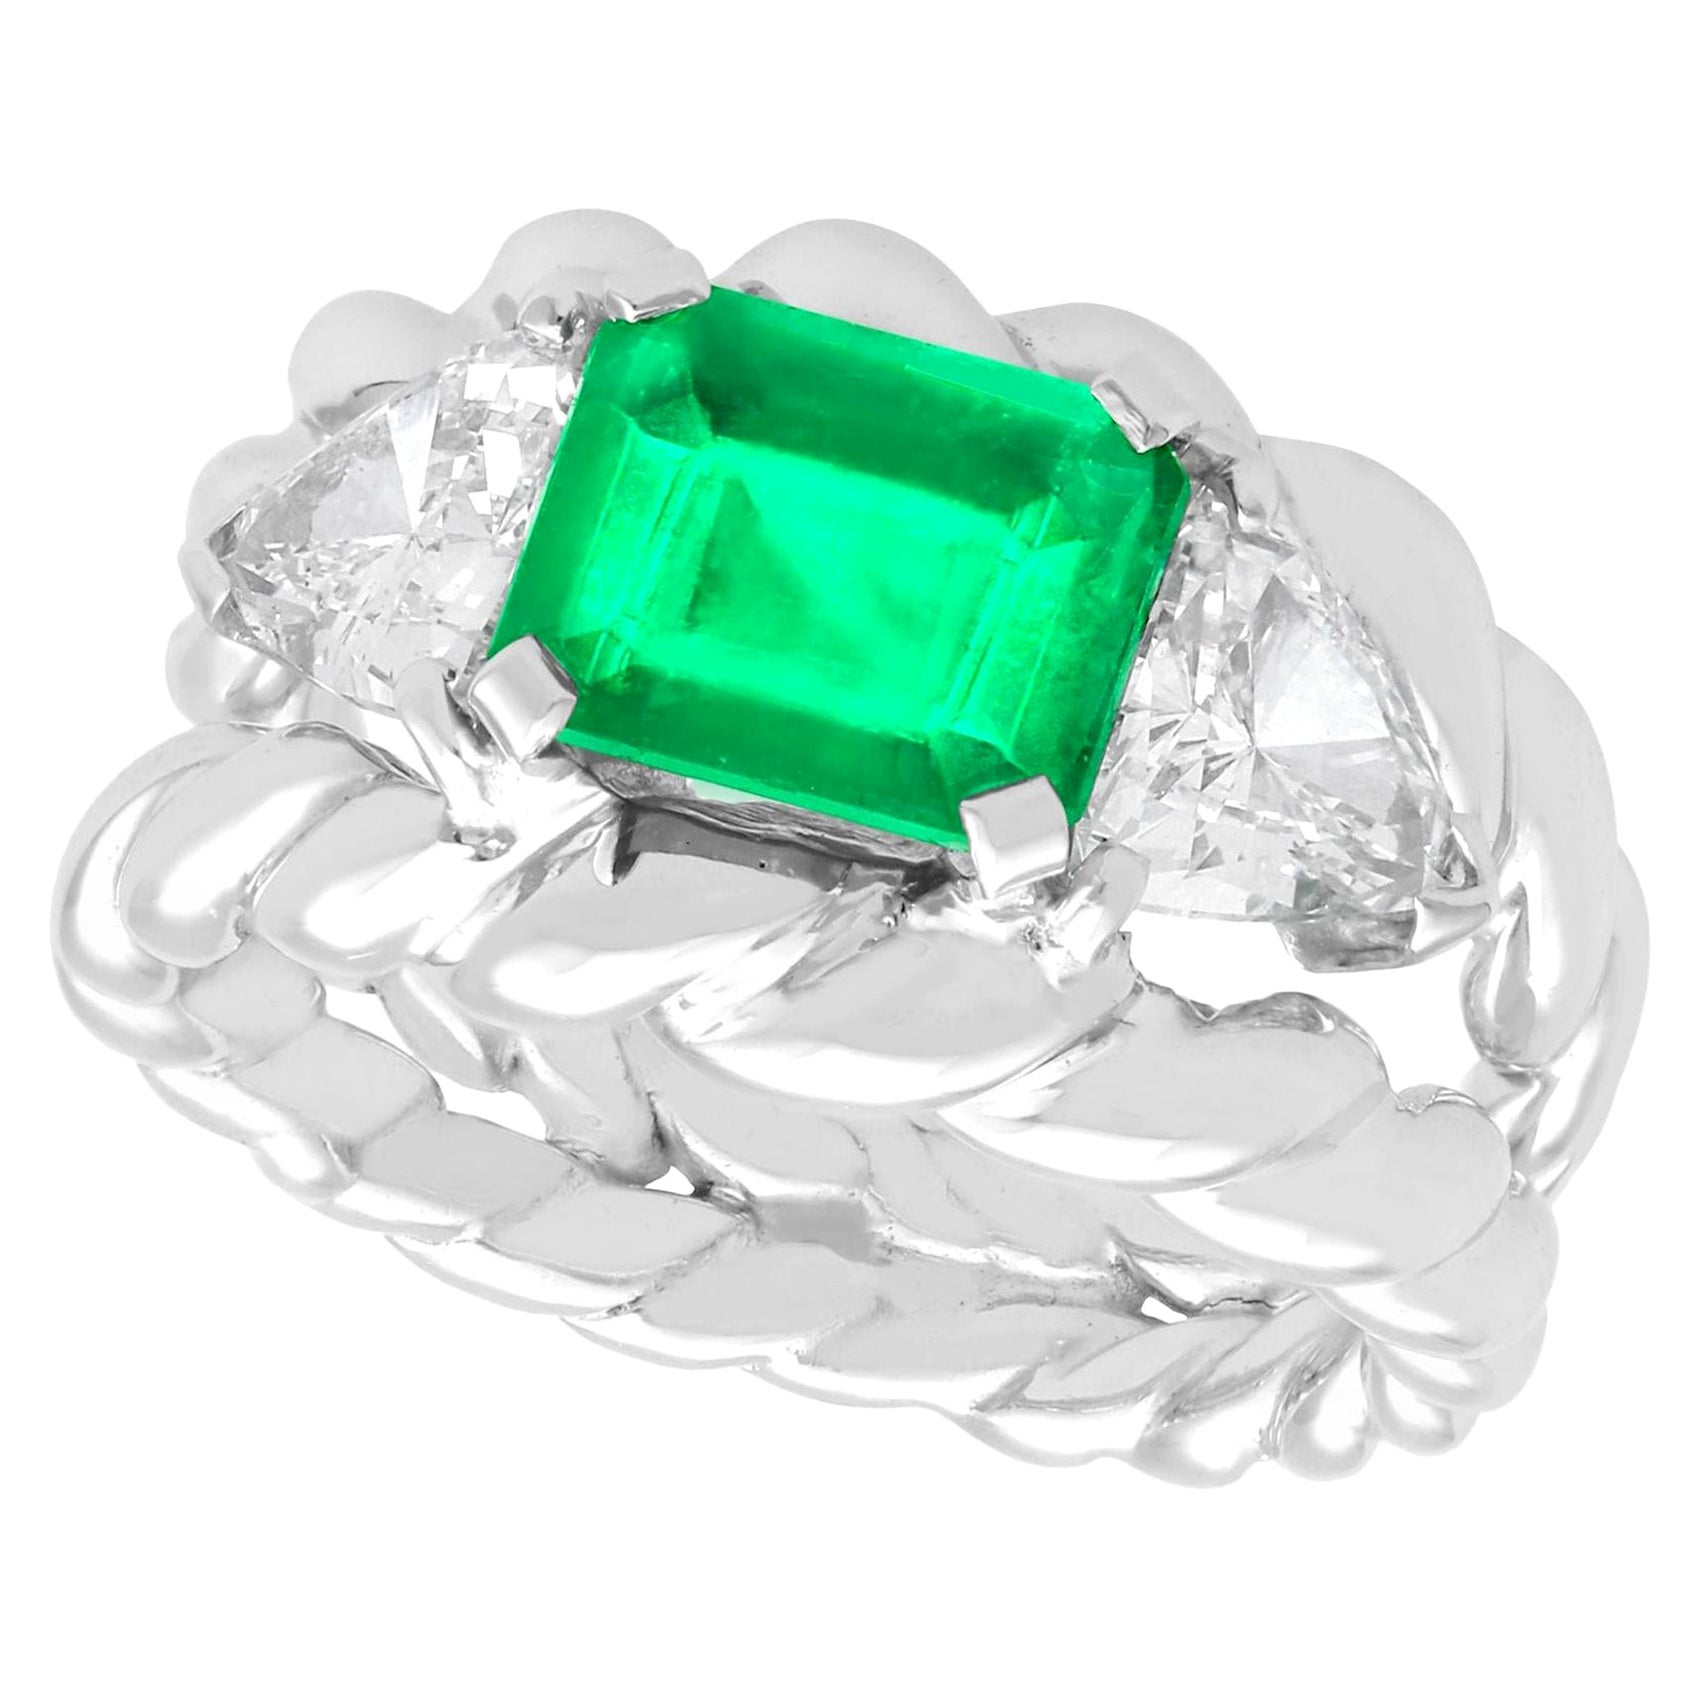 Vintage 1.64ct Emerald Cut Colombian Emerald and Diamond White Gold Ring For Sale